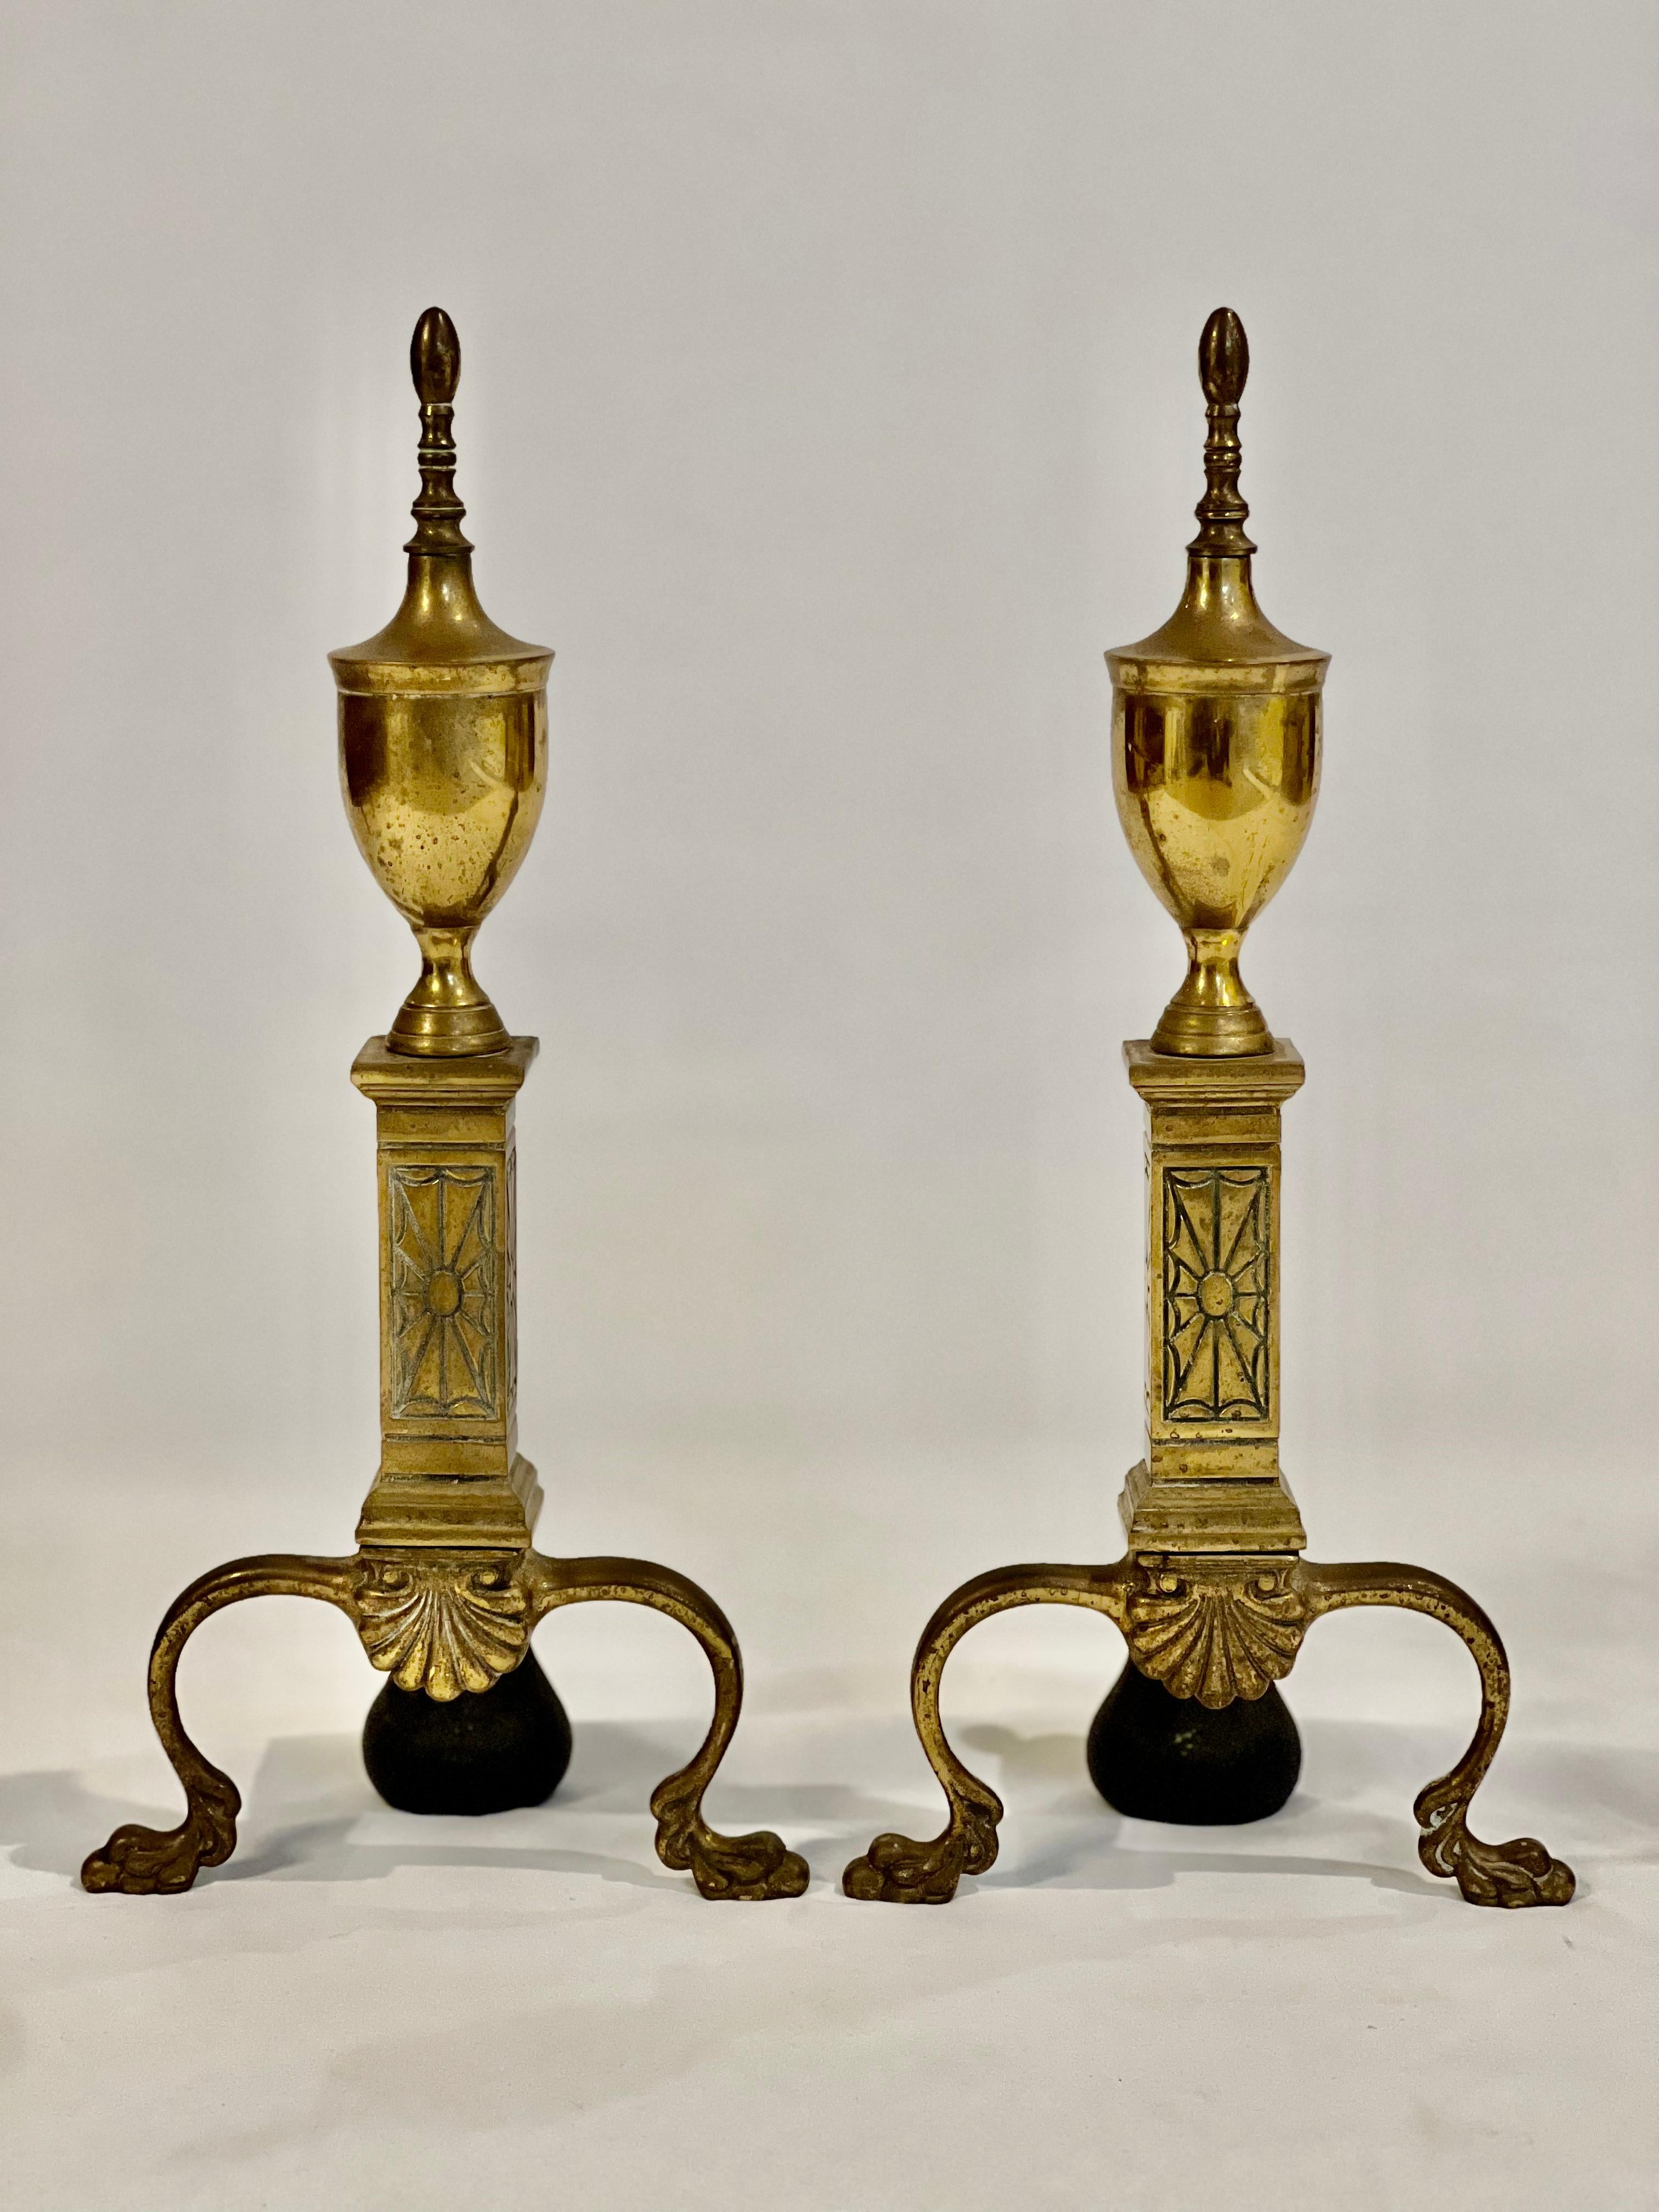 Antique brass andirons by Bennett Co., 1920's.

Elegant andirons Chippendale in style with a nod to Art Deco reflective of their period.  They feature a unique spider web design accompanied by a shell motif and classic paw feet.  They are supported